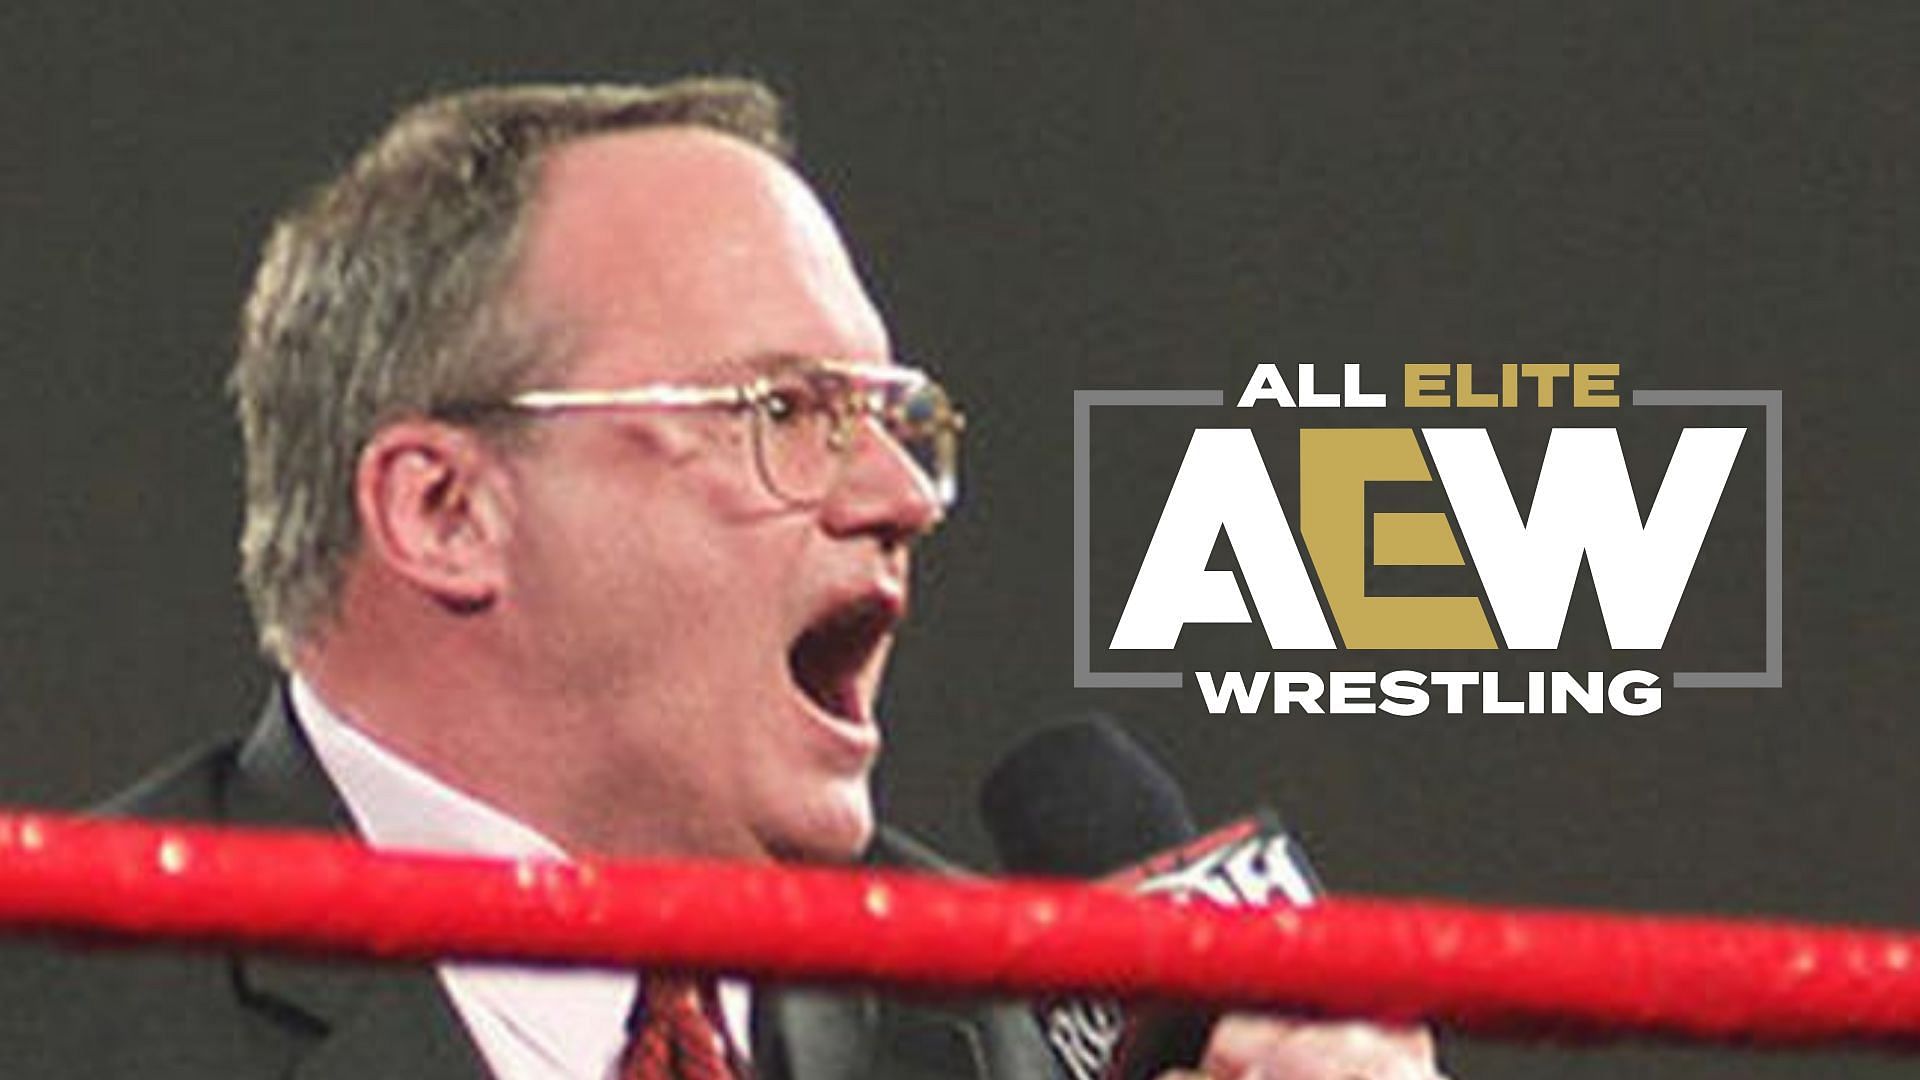 Jim Cornette does not want an AEW personality to appear on TV again